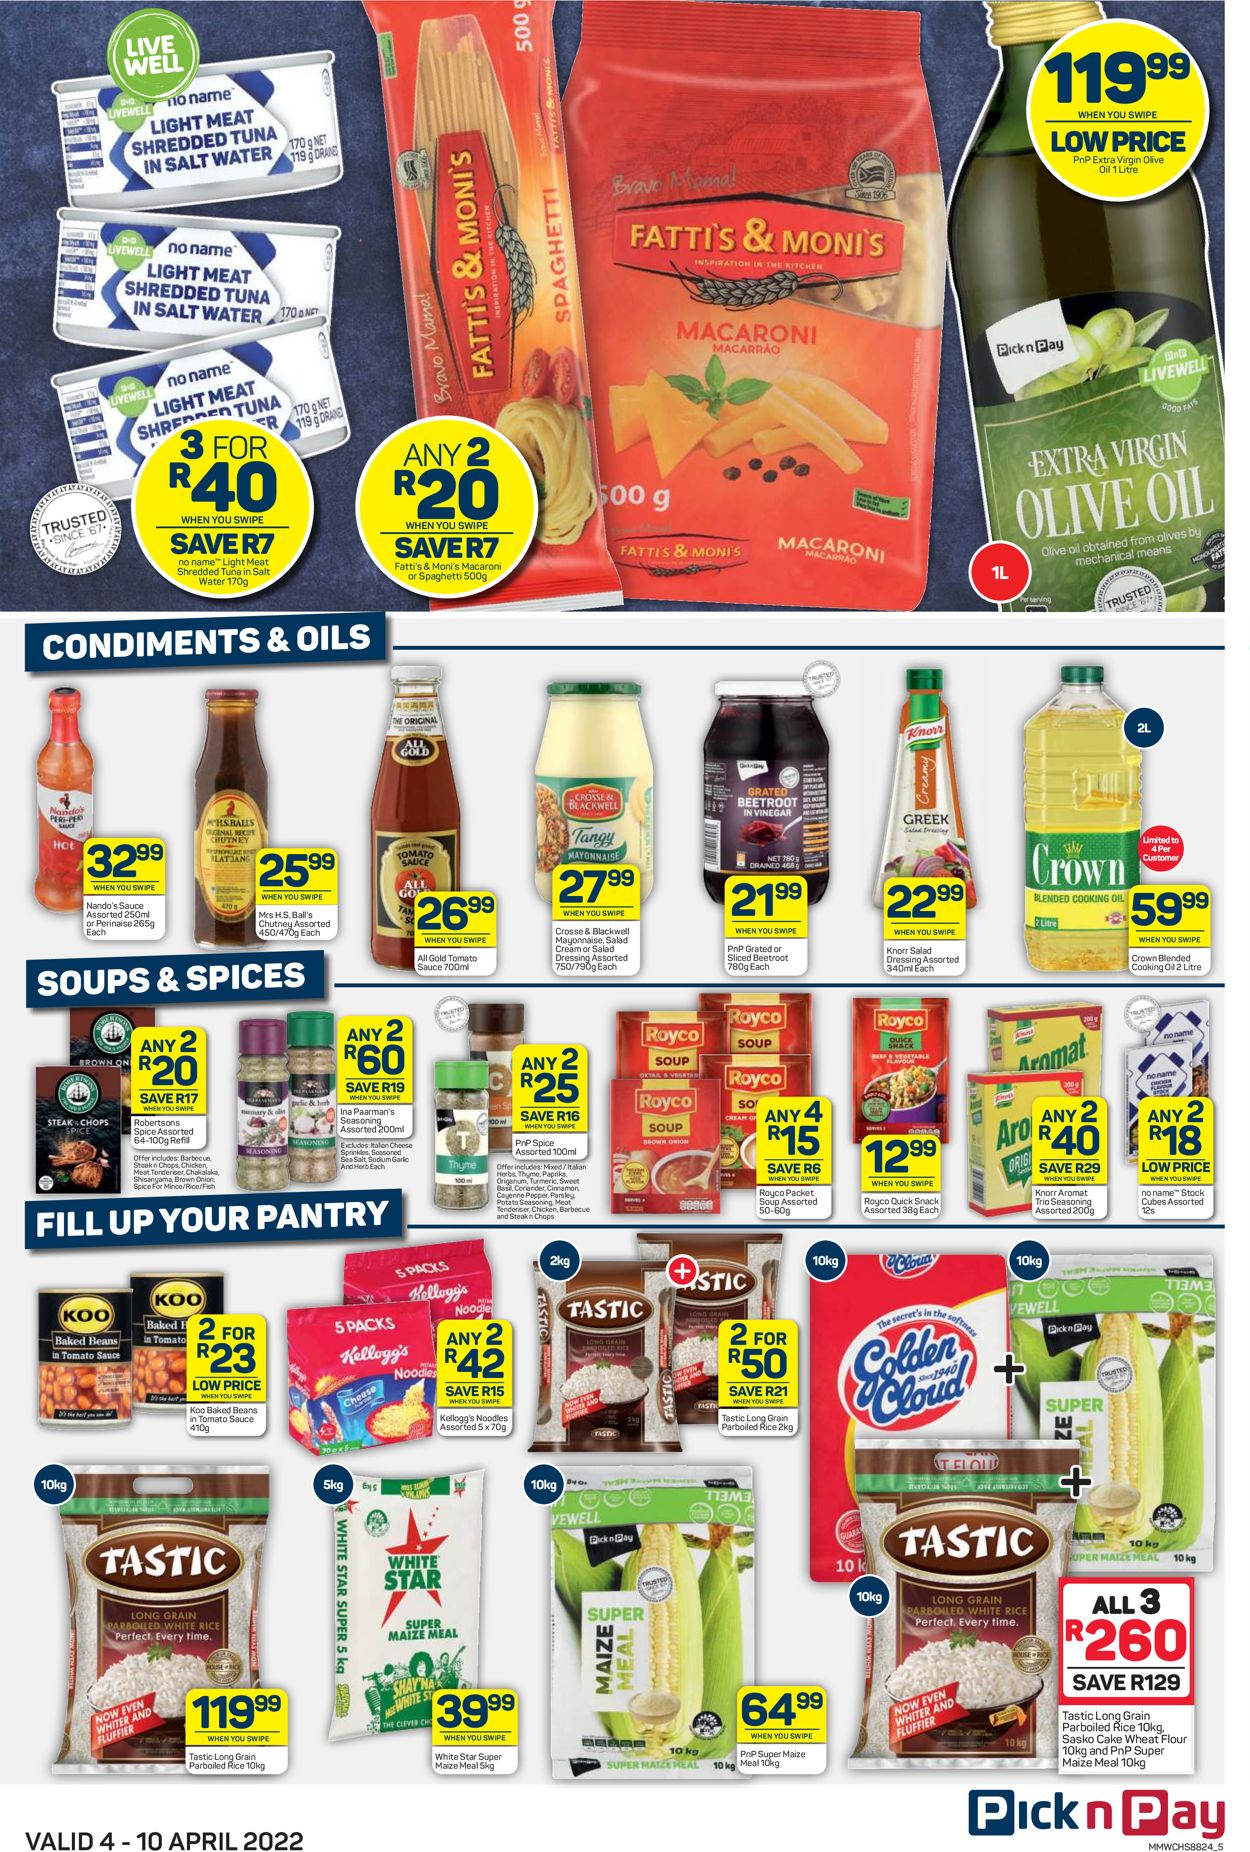 Pick n Pay EASTER 2022 Catalogue - 2022/04/04-2022/04/10 (Page 6)